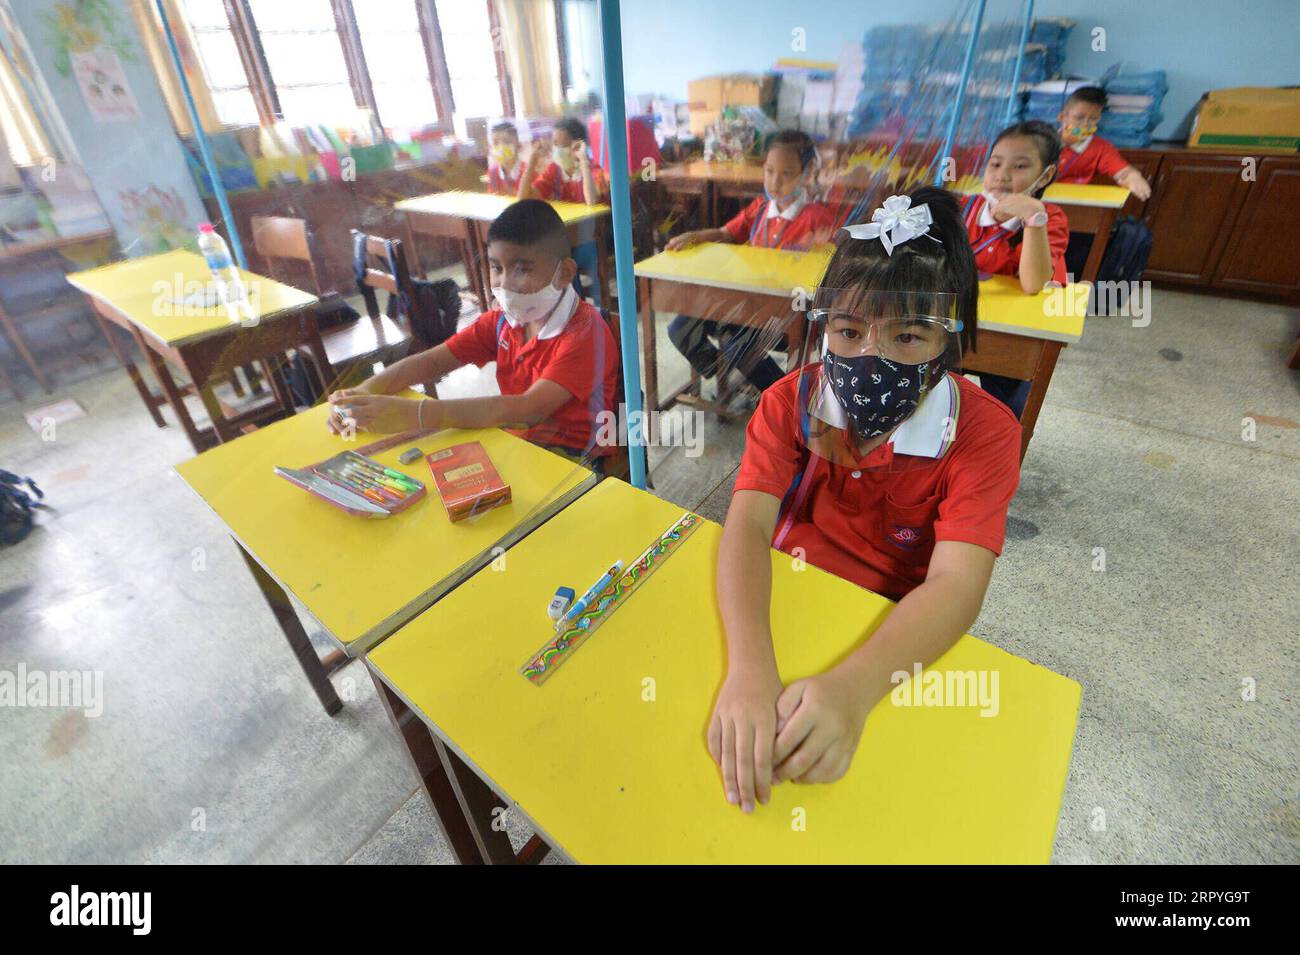 200701 -- BANGKOK, July 1, 2020 Xinhua -- Students wearing face masks take a break at a school in Bangkok, Thailand, July 1, 2020. Schools in Thailand reopened on Wednesday. Xinhua/Rachen Sageamsak THAILAND-BANGKOK-COVID-19-SCHOOL-REOPENING PUBLICATIONxNOTxINxCHN Stock Photo